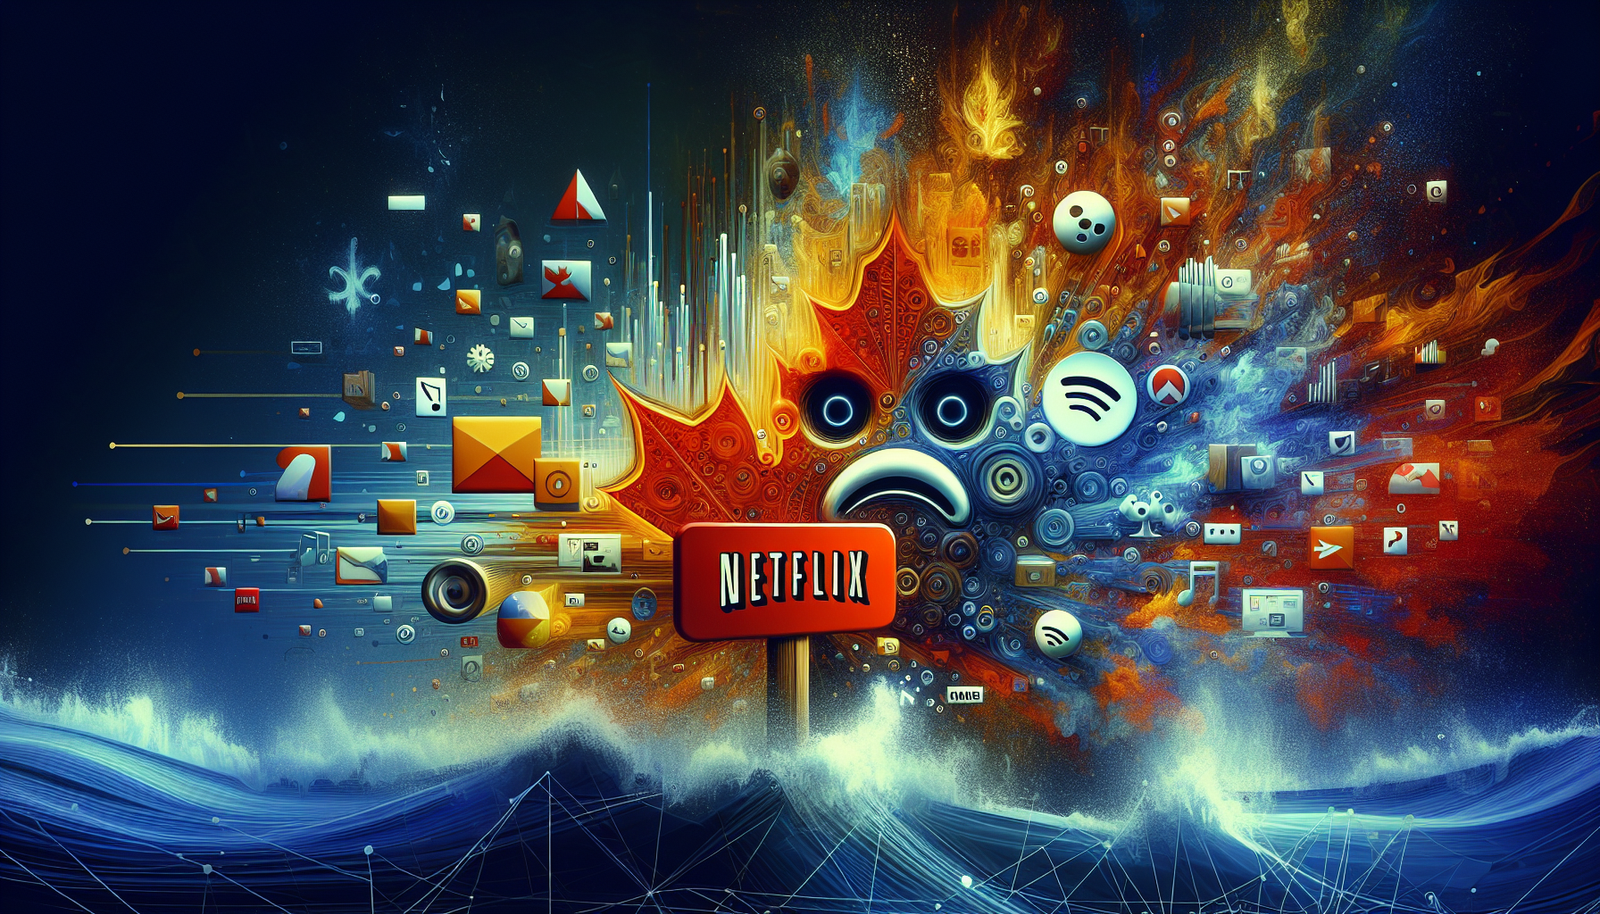 discover how canada's demand for 5% of revenue from streaming giants like netflix and spotify is reshaping the industry. learn why this move is shaking up the streaming landscape.